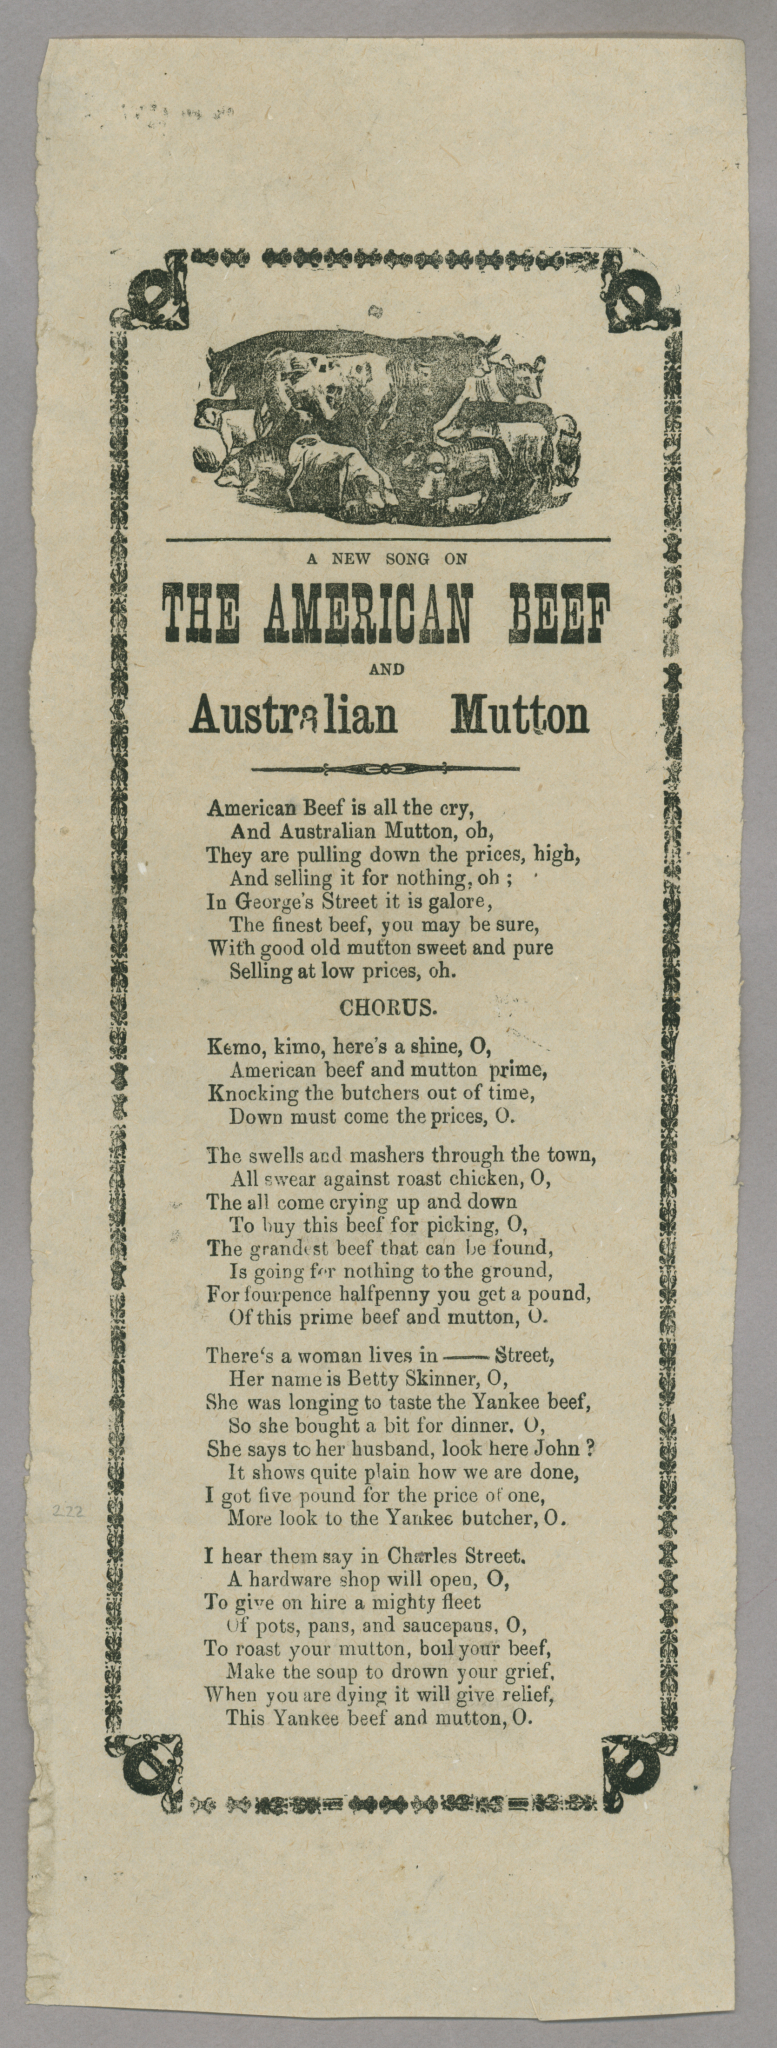 &quot;A New Song on the American Beef and Austalian Mutton&quot;